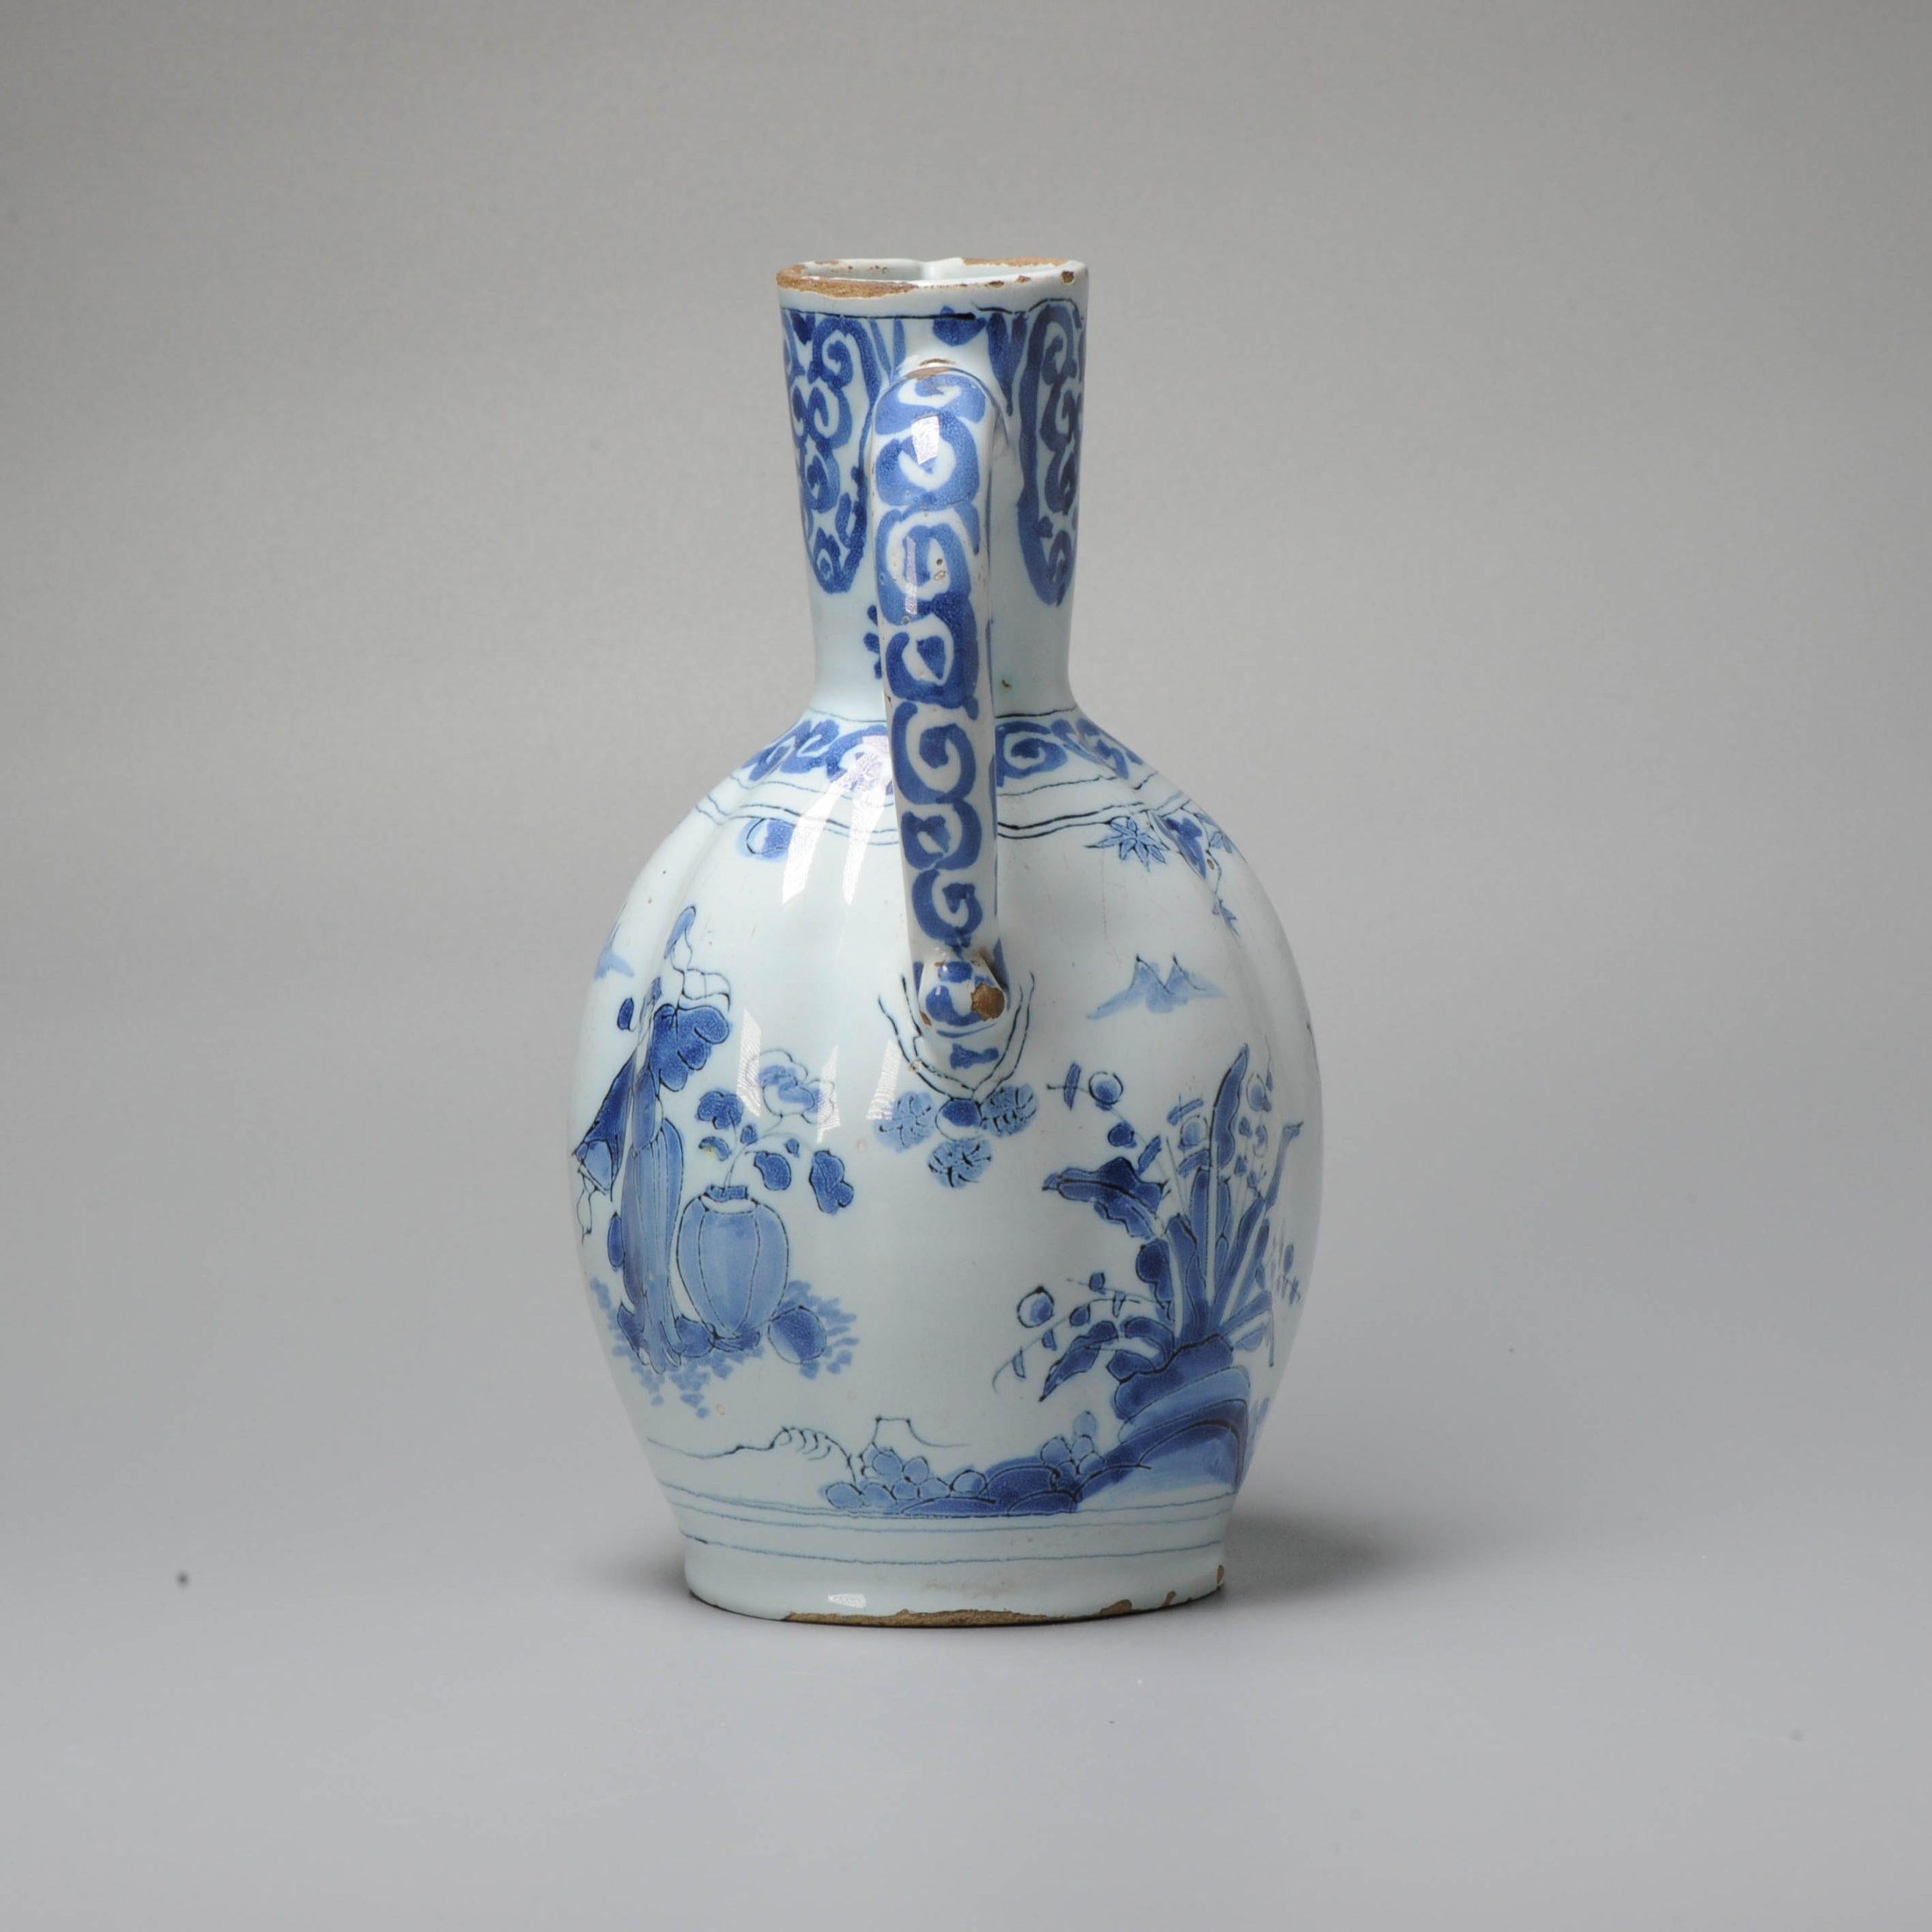 Earthenware ewer of ovoid ribbed body on spreading foot, cylindrical neck and a large mouth with a pinched spout. Curved handle. The shallow conical base is glazed and has a piece of lead attached. Decorated in different shades of blue on a white